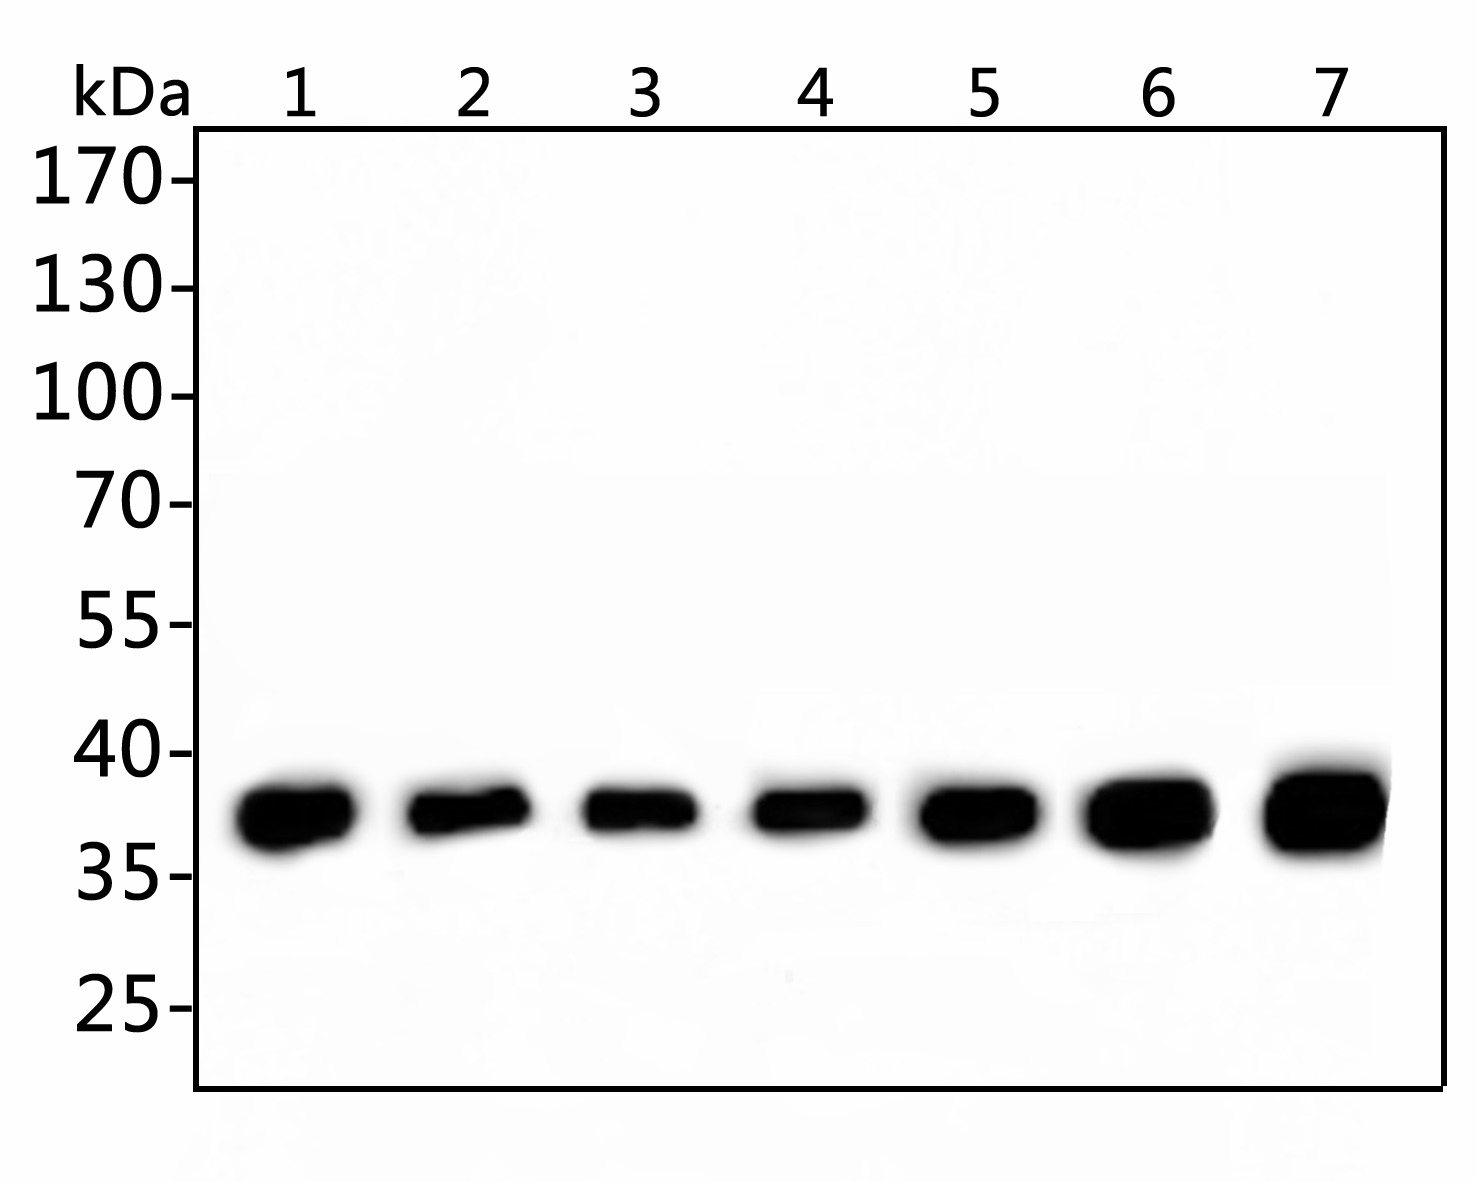 Western blot analysis of GAPDH on different lysates. Proteins were transferred to a PVDF membrane and blocked with 5% NFDM/TBST for 1 hour at room temperature. The primary antibody (ET1601-4, 1/5,000) was used in 5% NFDM/TBST at room temperature for 1 hour. Goat Anti-Rabbit IgG - HRP Secondary Antibody (HA1001) at 1:200,000 dilution was used for 45 mins at room temperature.<br />
<br />
Positive control: <br />
Lane 1: PC-3 cell lysate, 10 µg/Lane<br />
Lane 2: Mouse colon tissue lysate, 20 µg/Lane<br />
Lane 3: SH-SY5Y cell lysate, 10 µg/Lane<br />
Lane 4: PC-3 cell lysate, 10 µg/Lane<br />
Lane 5: NIH/3T3 cell lysate, 10 µg/Lane<br />
Lane 6: SK-Br-3 cell lysate, 10 µg/Lane<br />
Lane 7: Rat brain tissue lysate, 20 µg/Lane